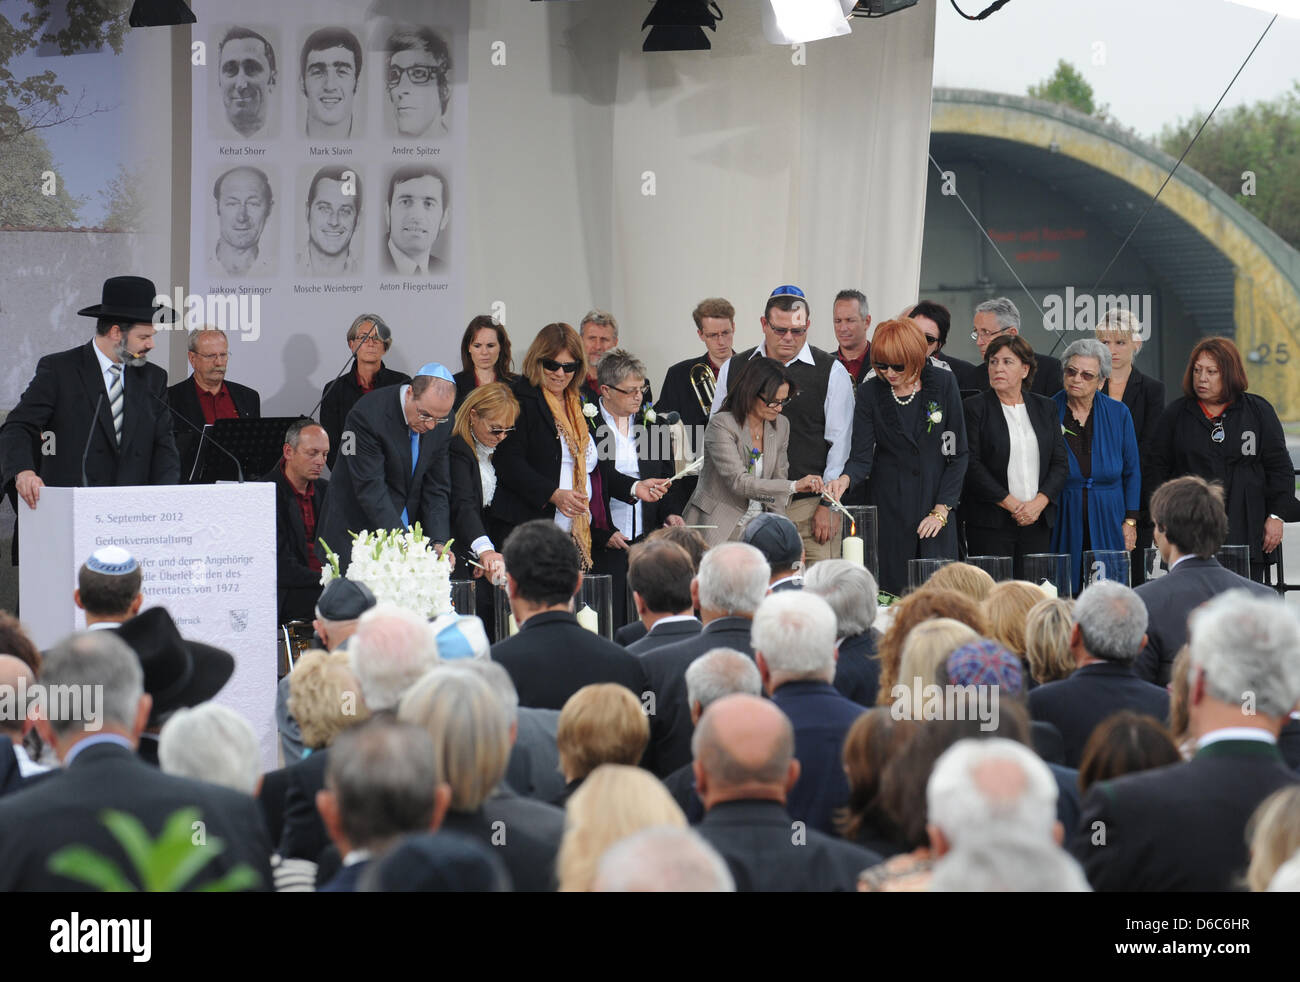 Relatives of the victims of the 1972 Munich Olympics massacre stand on stage after having lit up candles during the commemorative event for the victims of the Munich Olympic 1972 shootings at the air base in Fuerstenfeldbruck, Germany, 05 September 2012. On 05 September 1972, gunmen broke into the Israeli team's flat at the Olympic village, immediately killing two of the athletes a Stock Photo